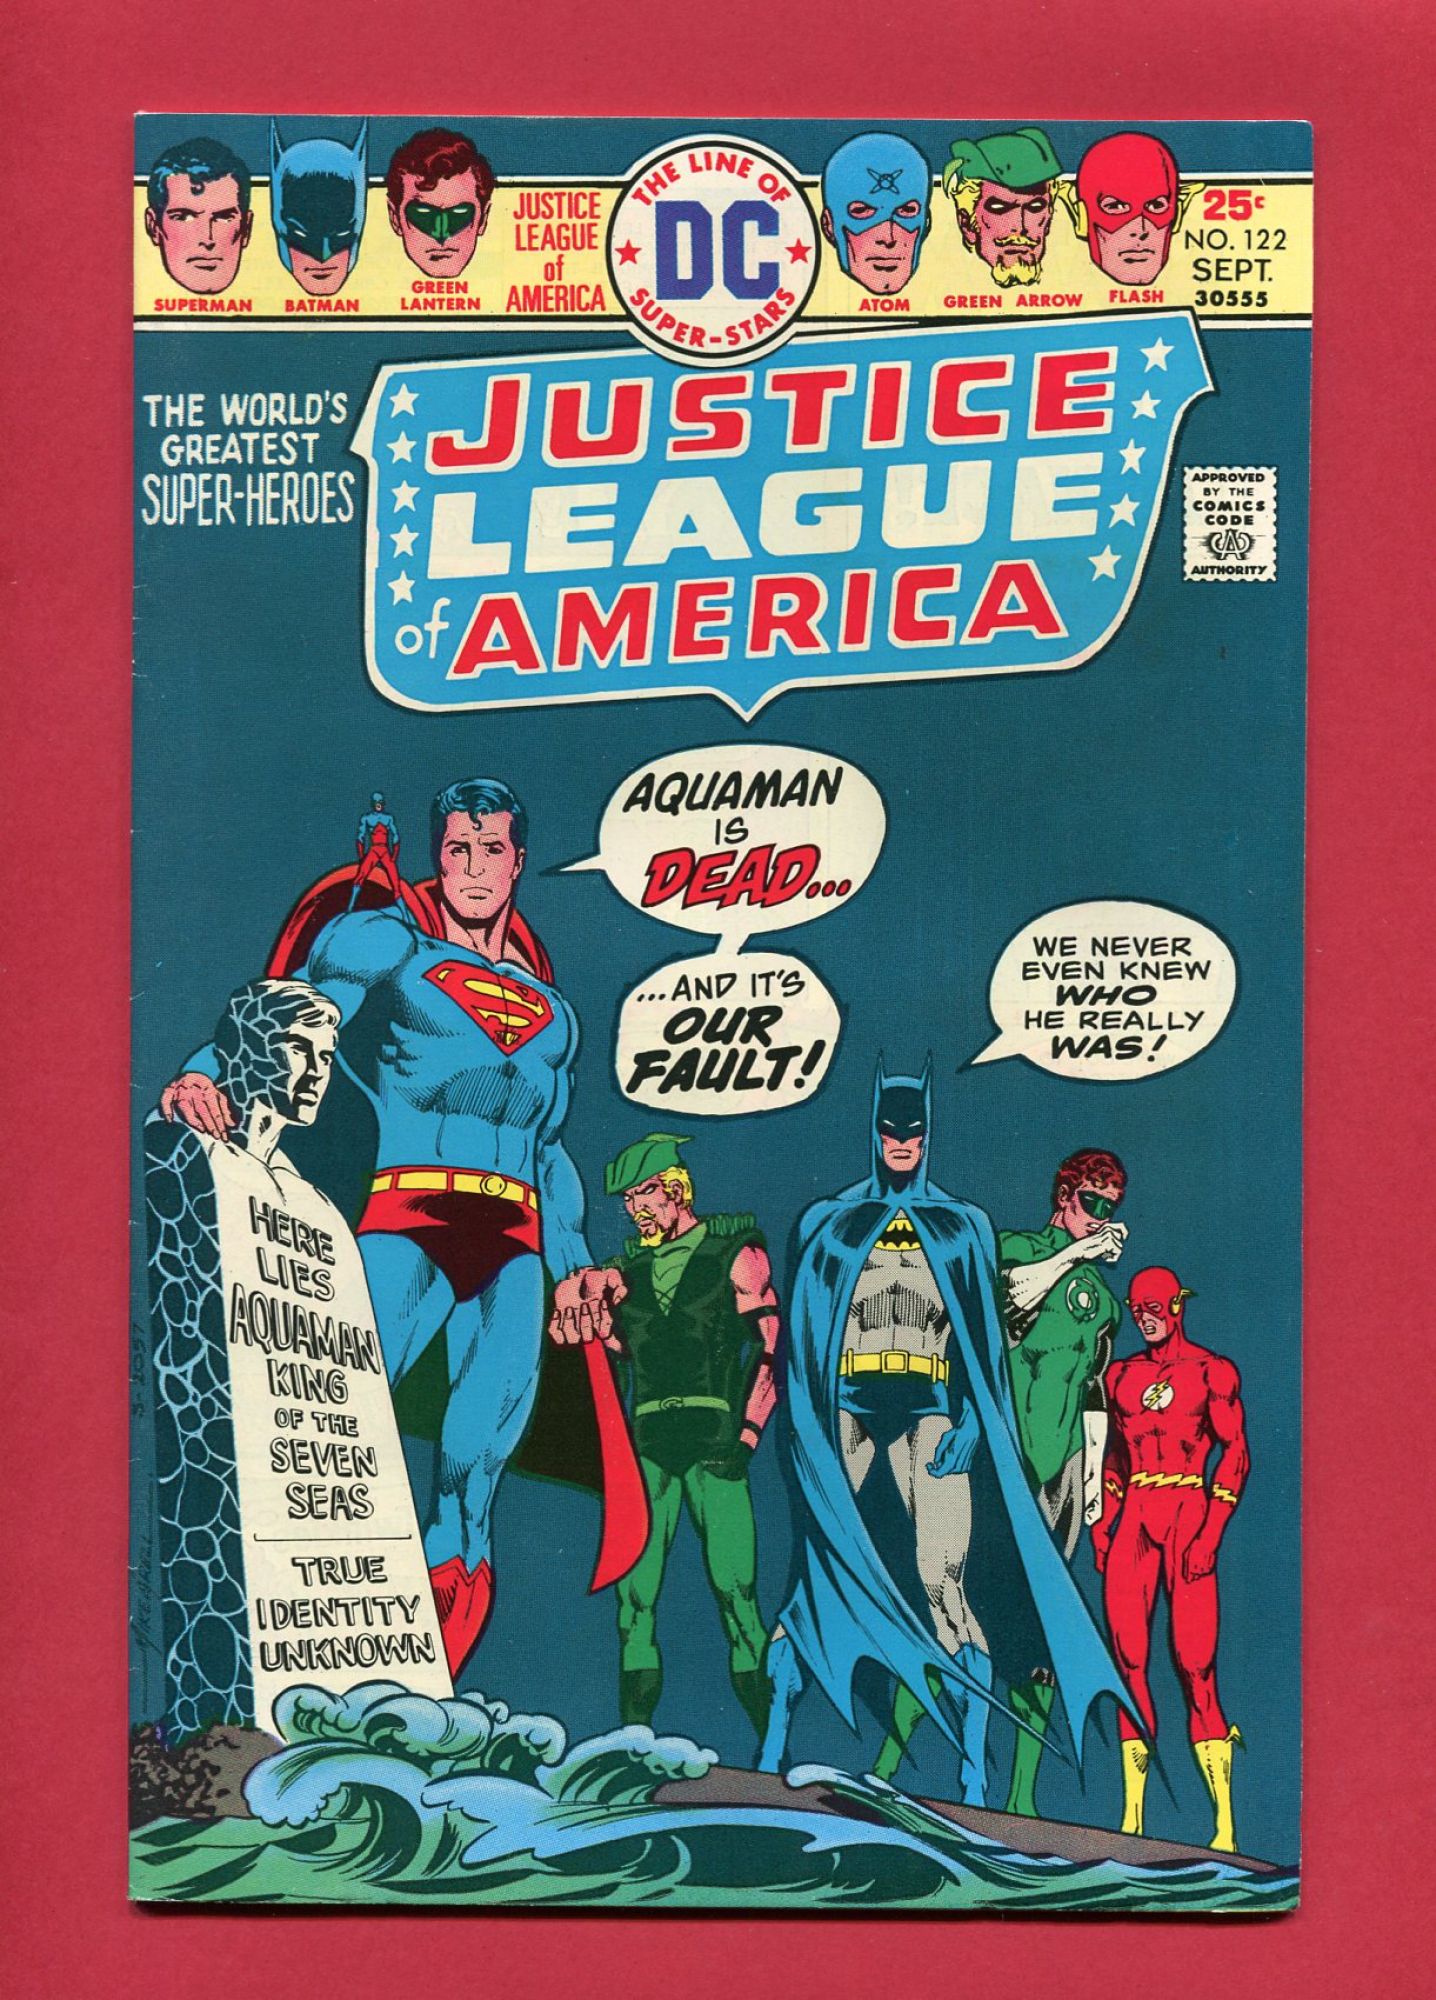 Justice League of America #122, Sep 1975, 7.5 FN/VF